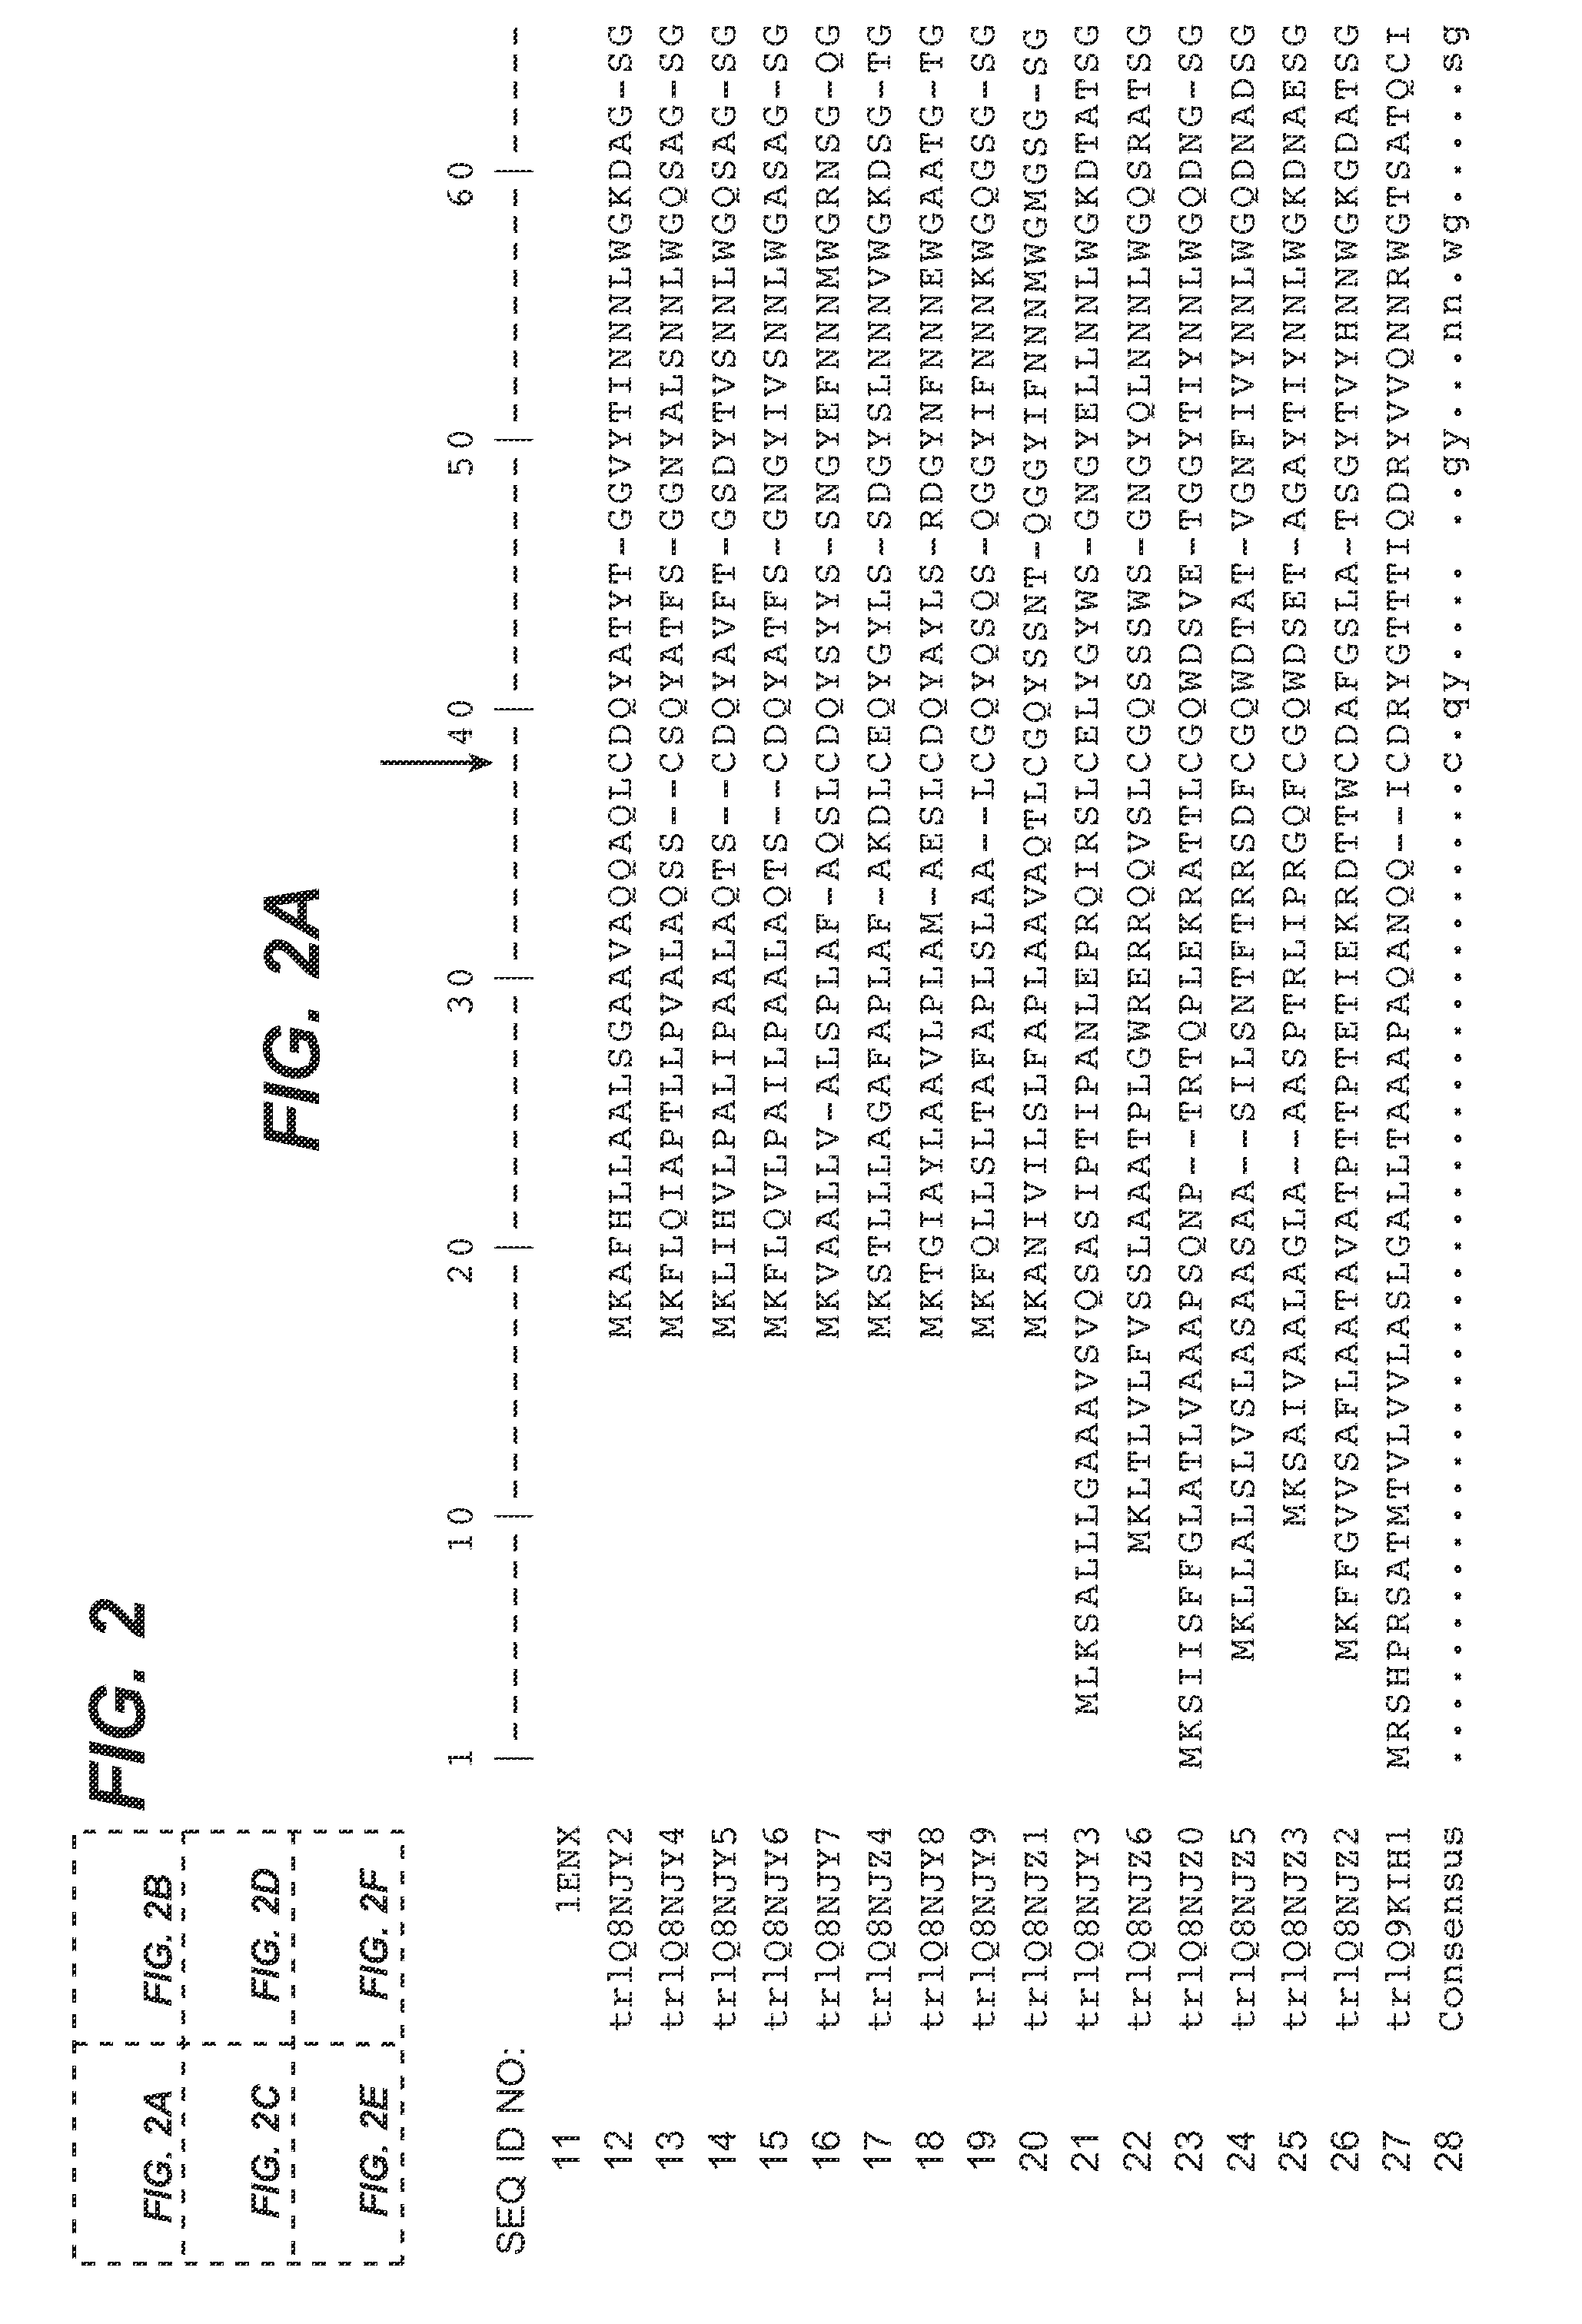 Modified enzymes, methods to produce modified enzymes and uses thereof